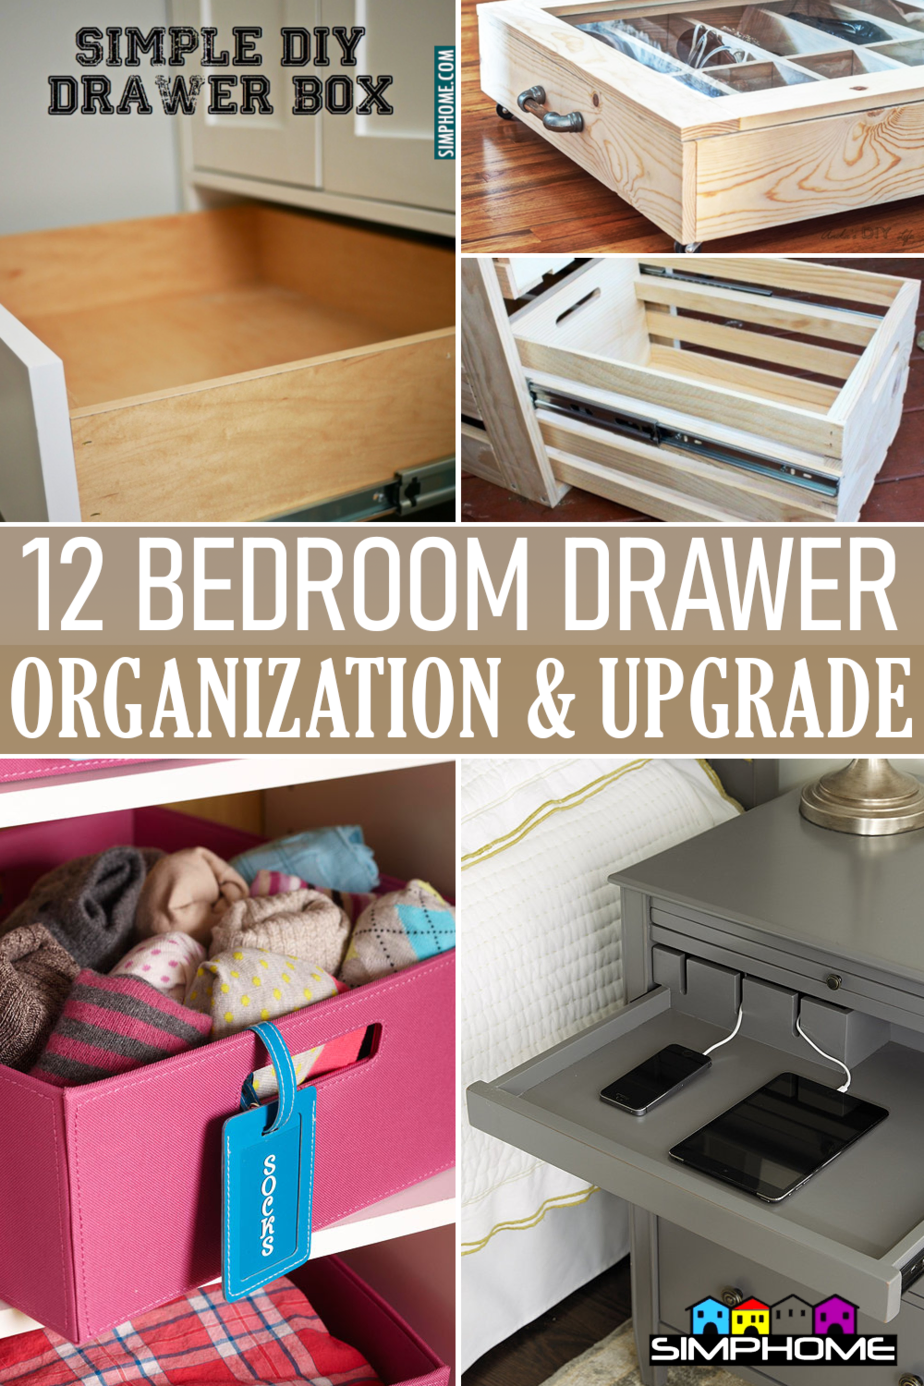 Bedroom Drawer and Organization via Simphome.comFeatured Thumb